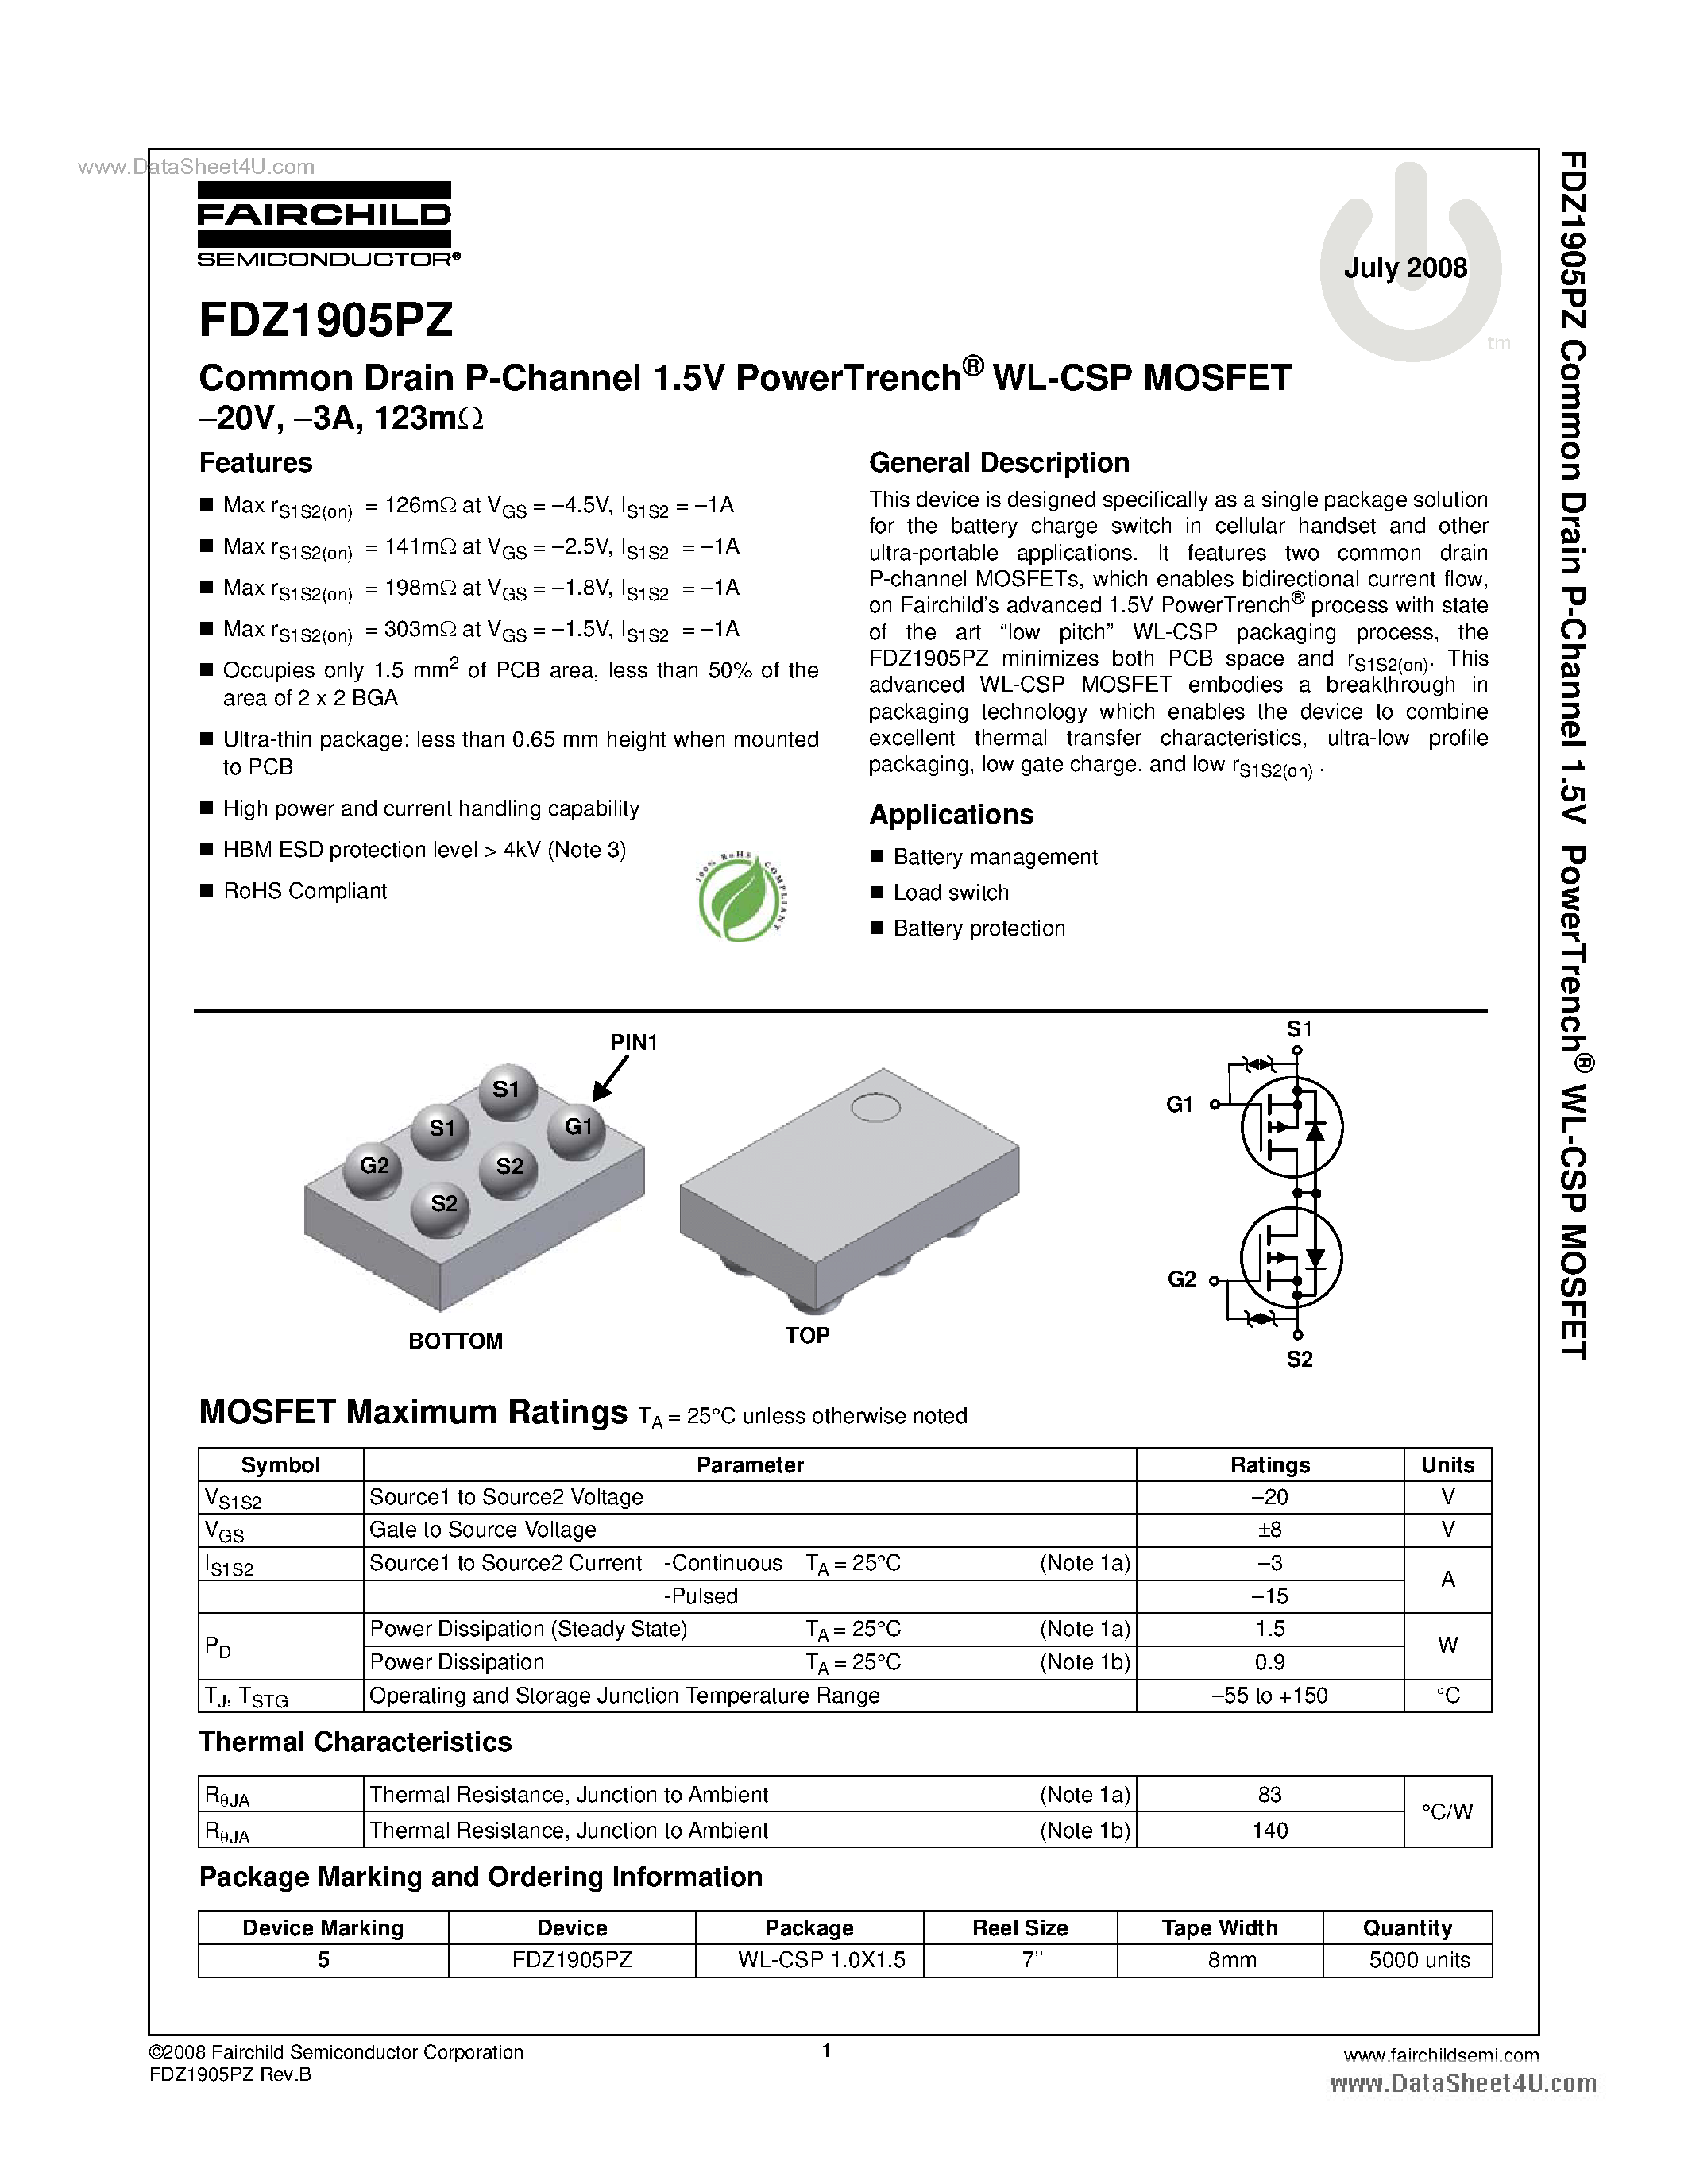 Datasheet FDZ1905PZ - Common Drain P-Channel 1.5V PowerTrench WL-CSP MOSFET page 1